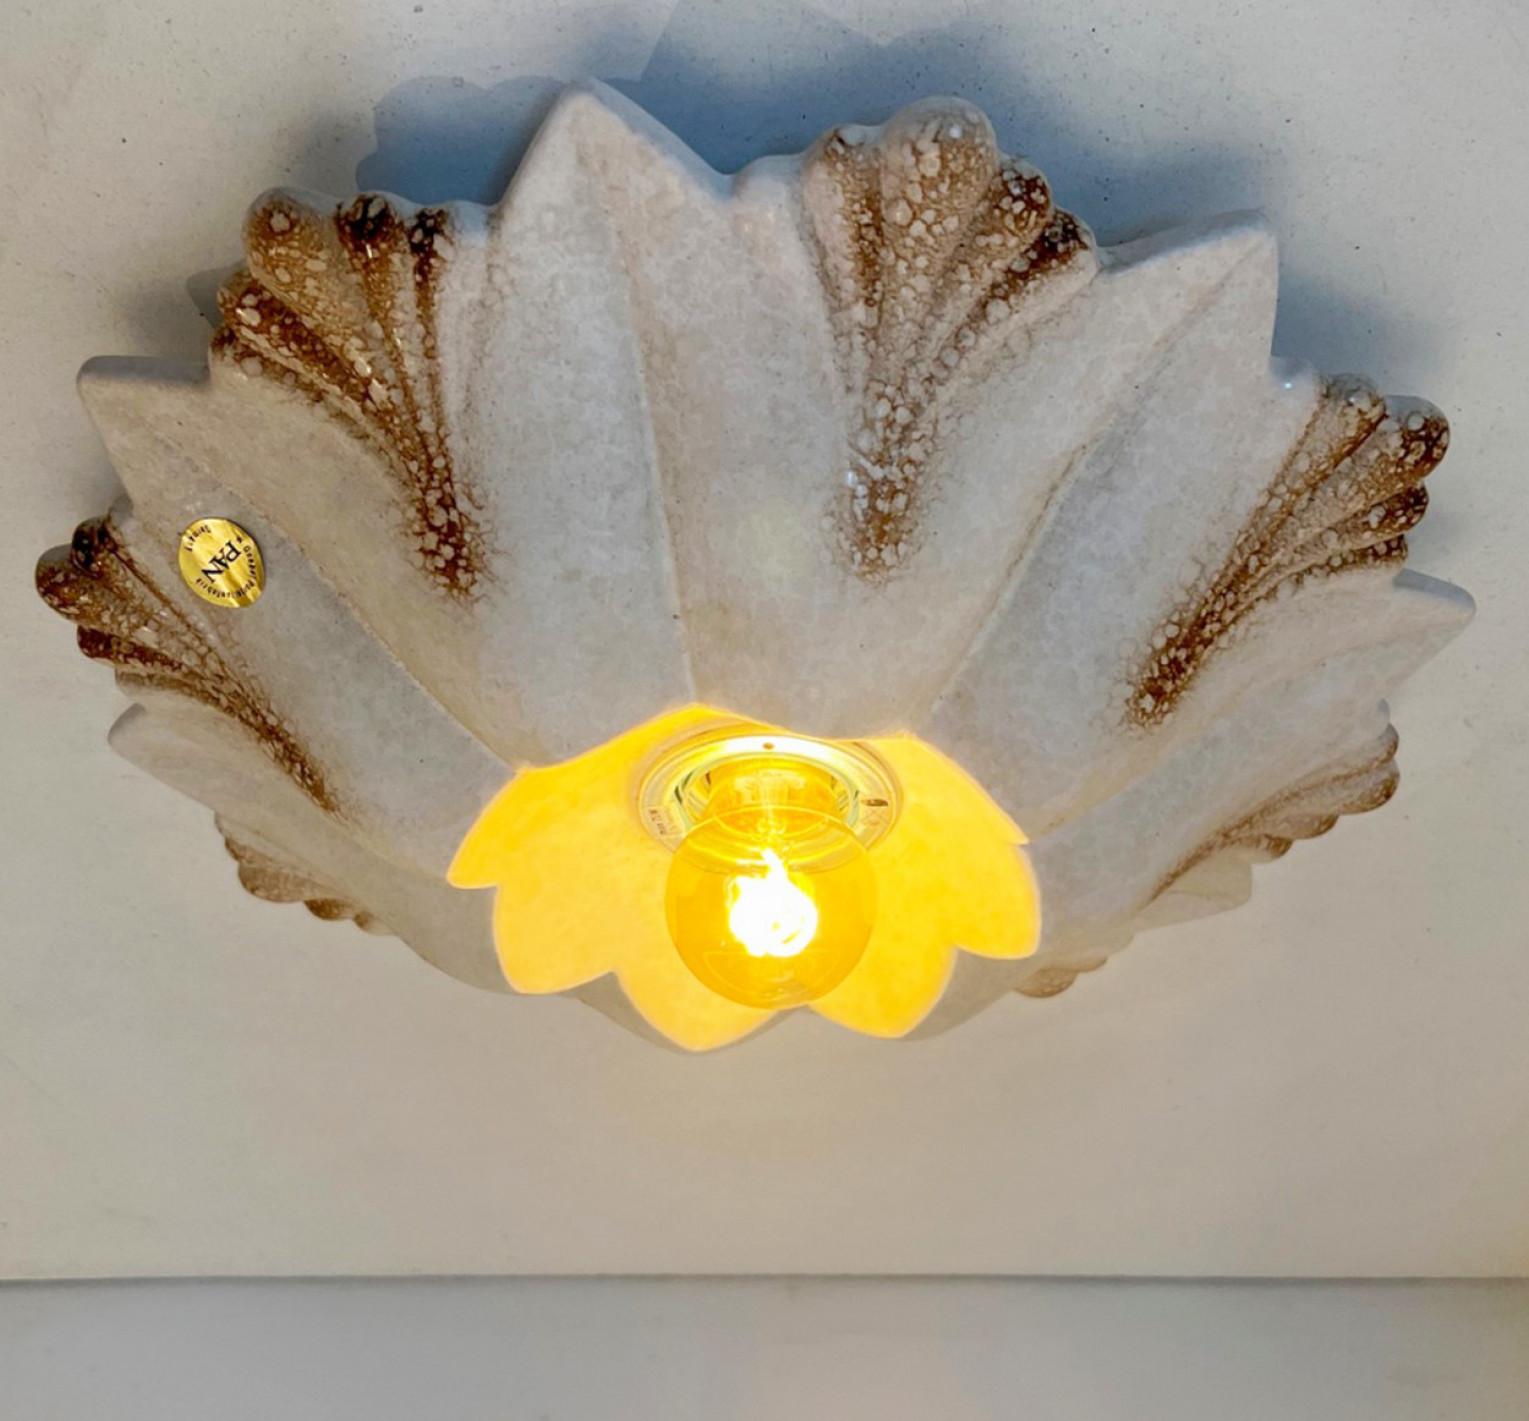 Flower-shaped white sand ceramic wall light in Fat Lava style. Manufactured by Hustadt Leuchten Keramik, Germany in the 1970s.

The style of the glaze is called 'Fat Lava'. Which means the glaze is thick on some parts, like lava.
A typical way to